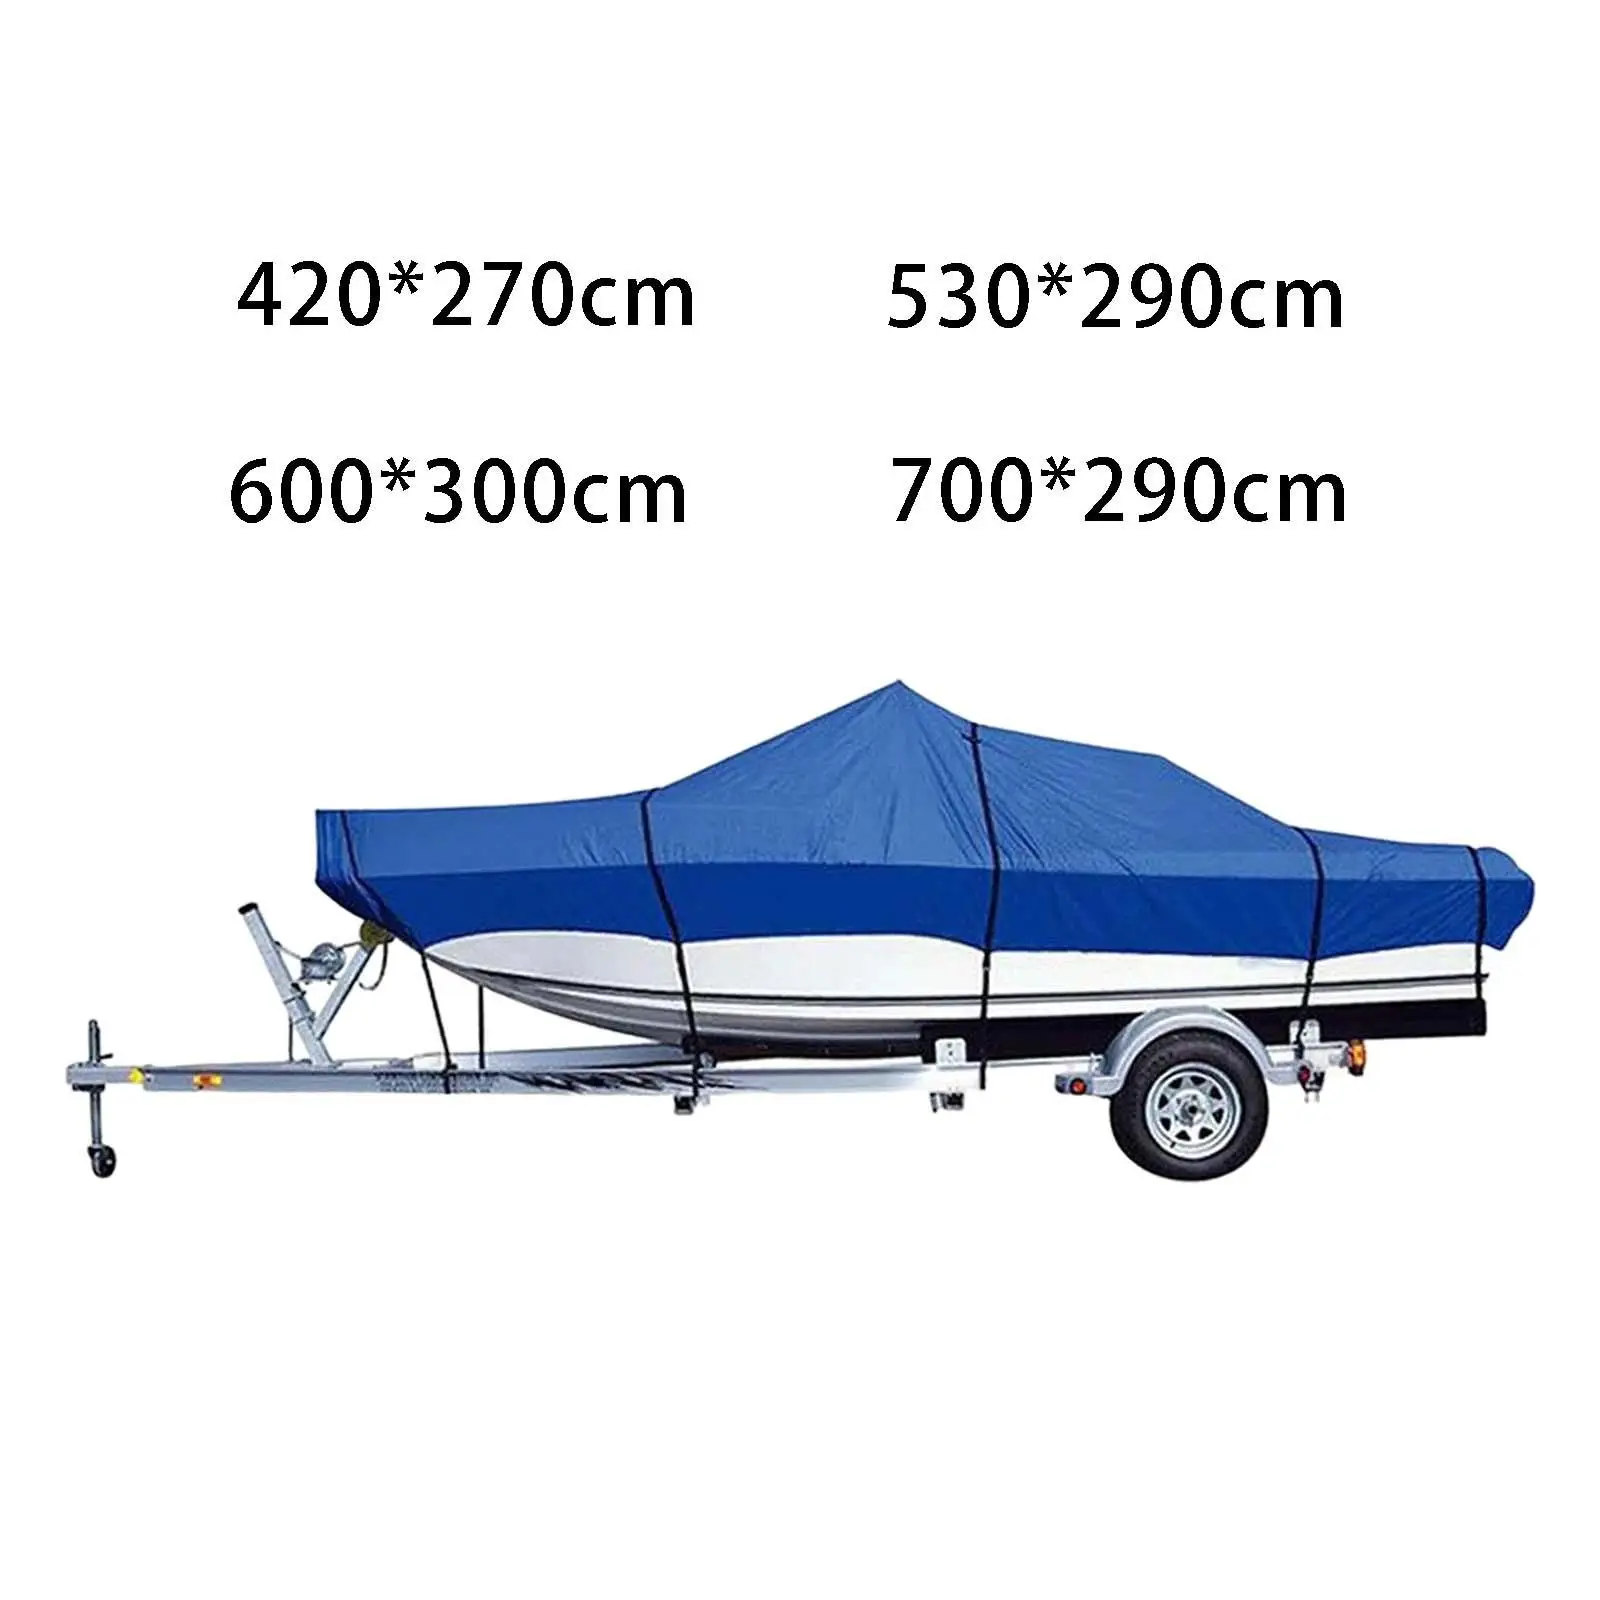 210 Cloth Kayak Boat Cover,   Marine Outboard Cover with Drawstring Strap Waterproof Fit for  Shield 